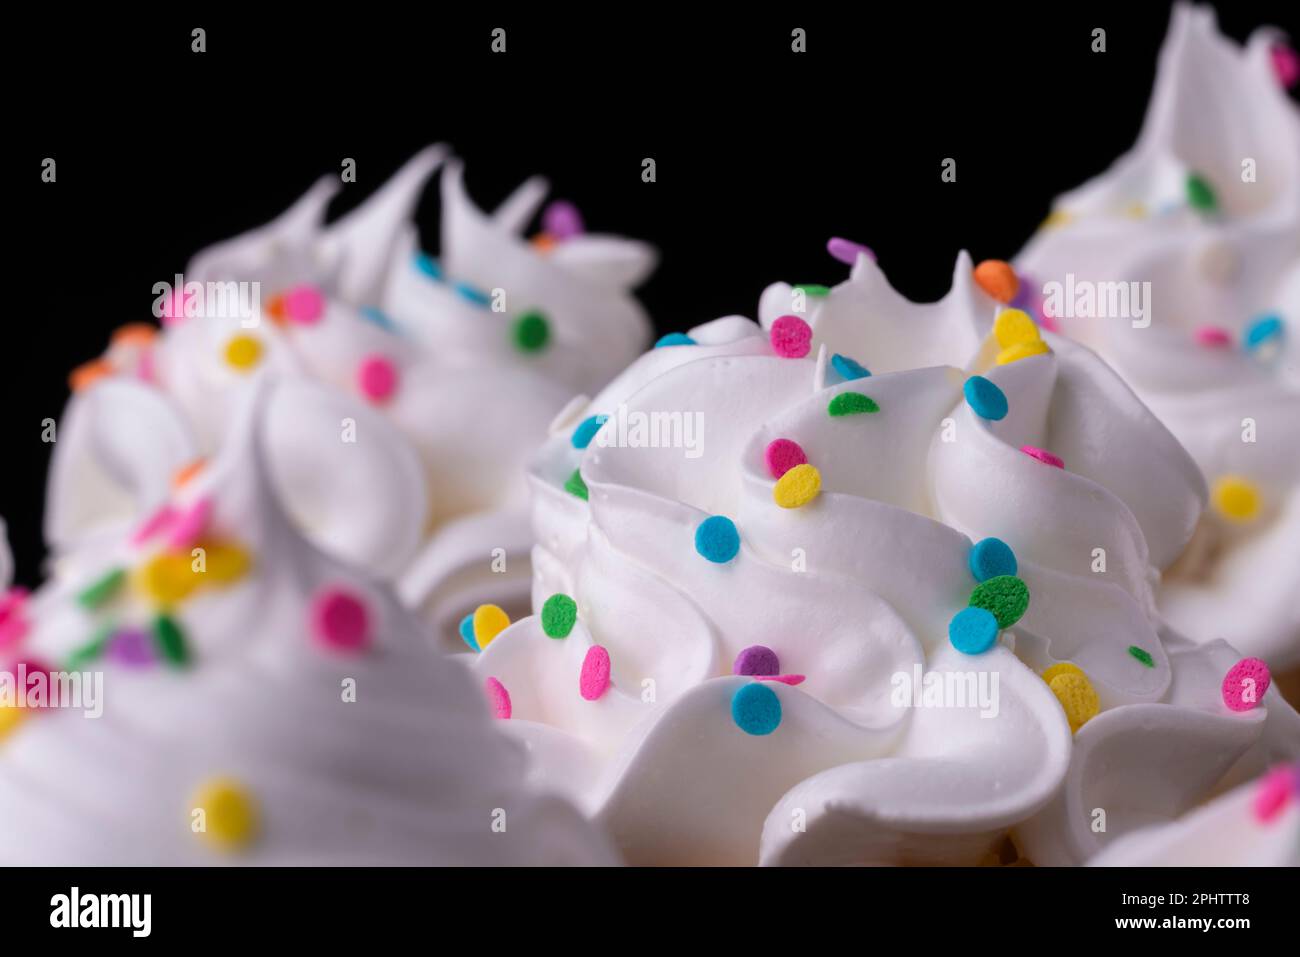 Fluffy vanilla cupcakes, with meringue and dragees on a black background, original recipe Stock Photo